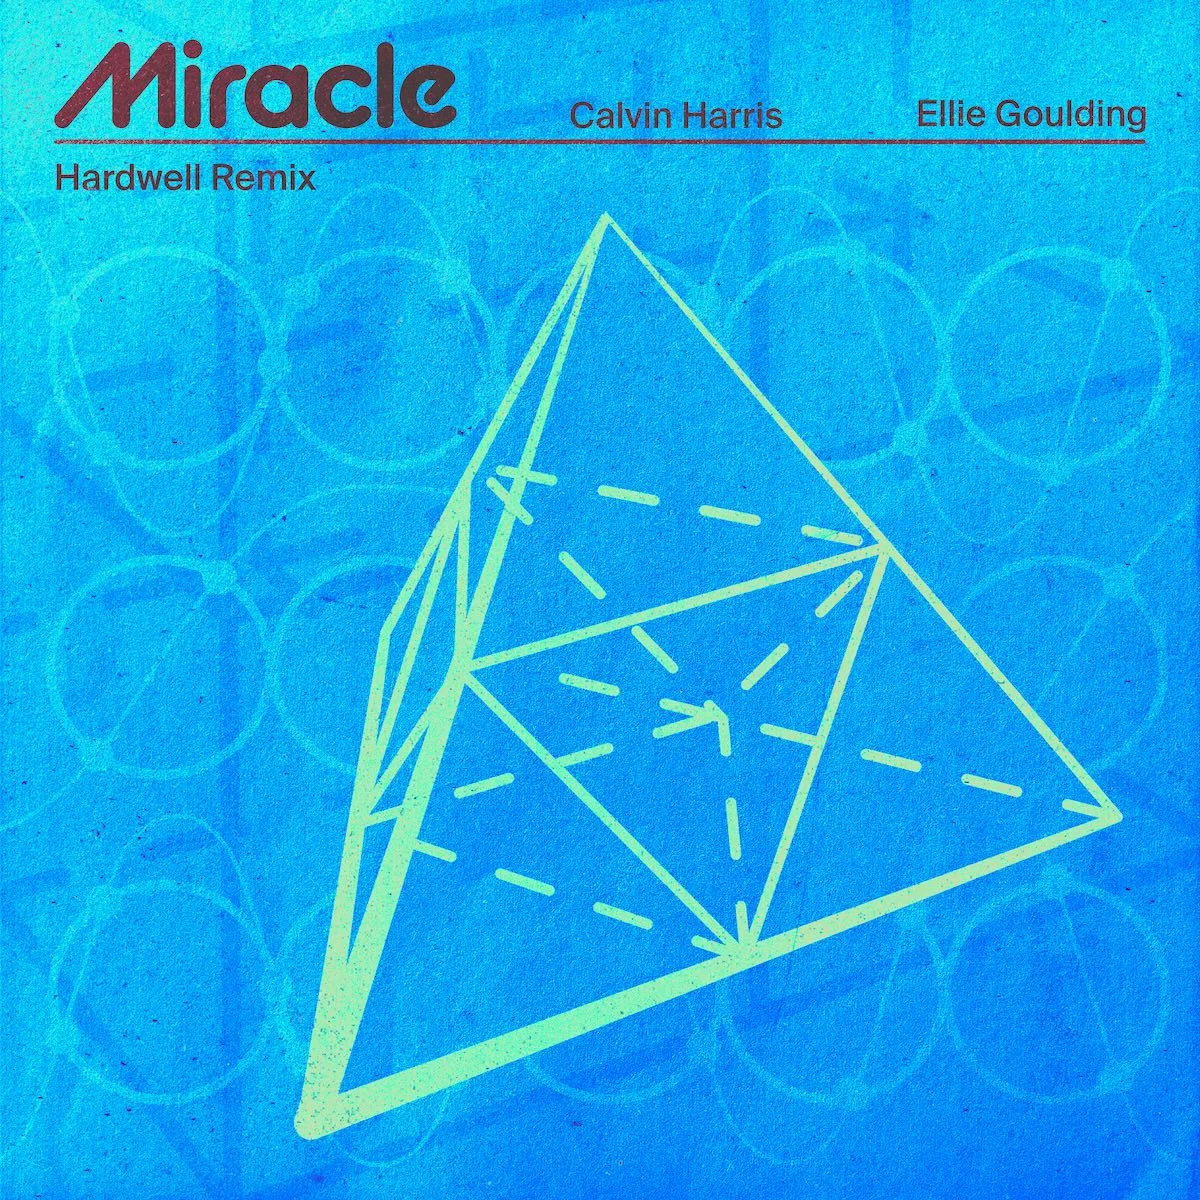 Miracle (with Ellie Goulding) [Hardwell Remix] – Calvin Harris & Ellie Goulding & Hardwell